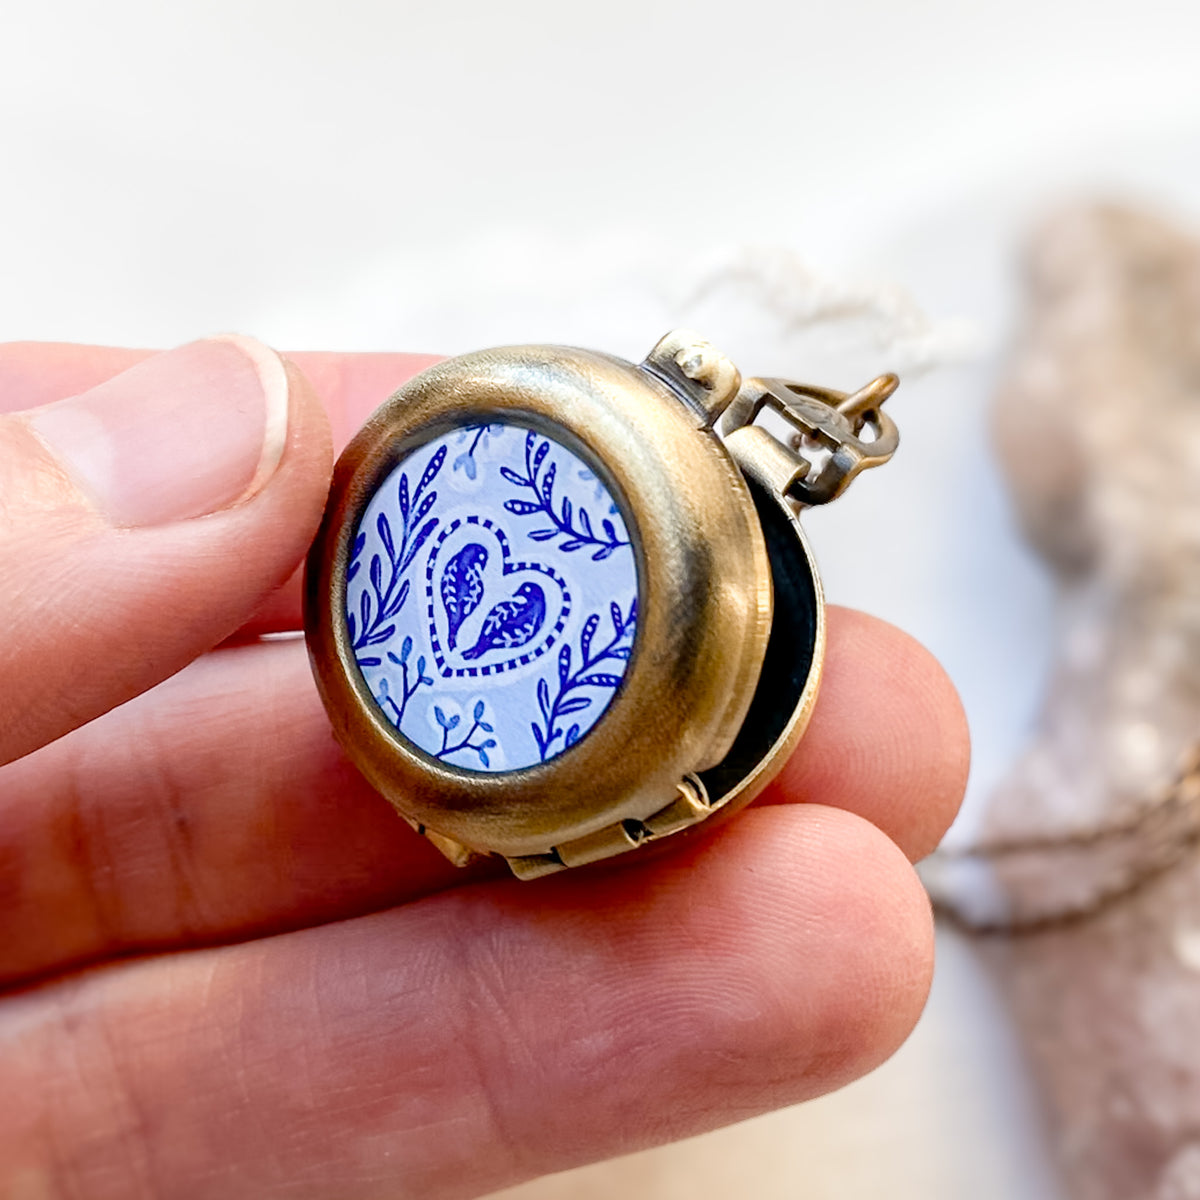 a person holding a small pocket watch in their hand